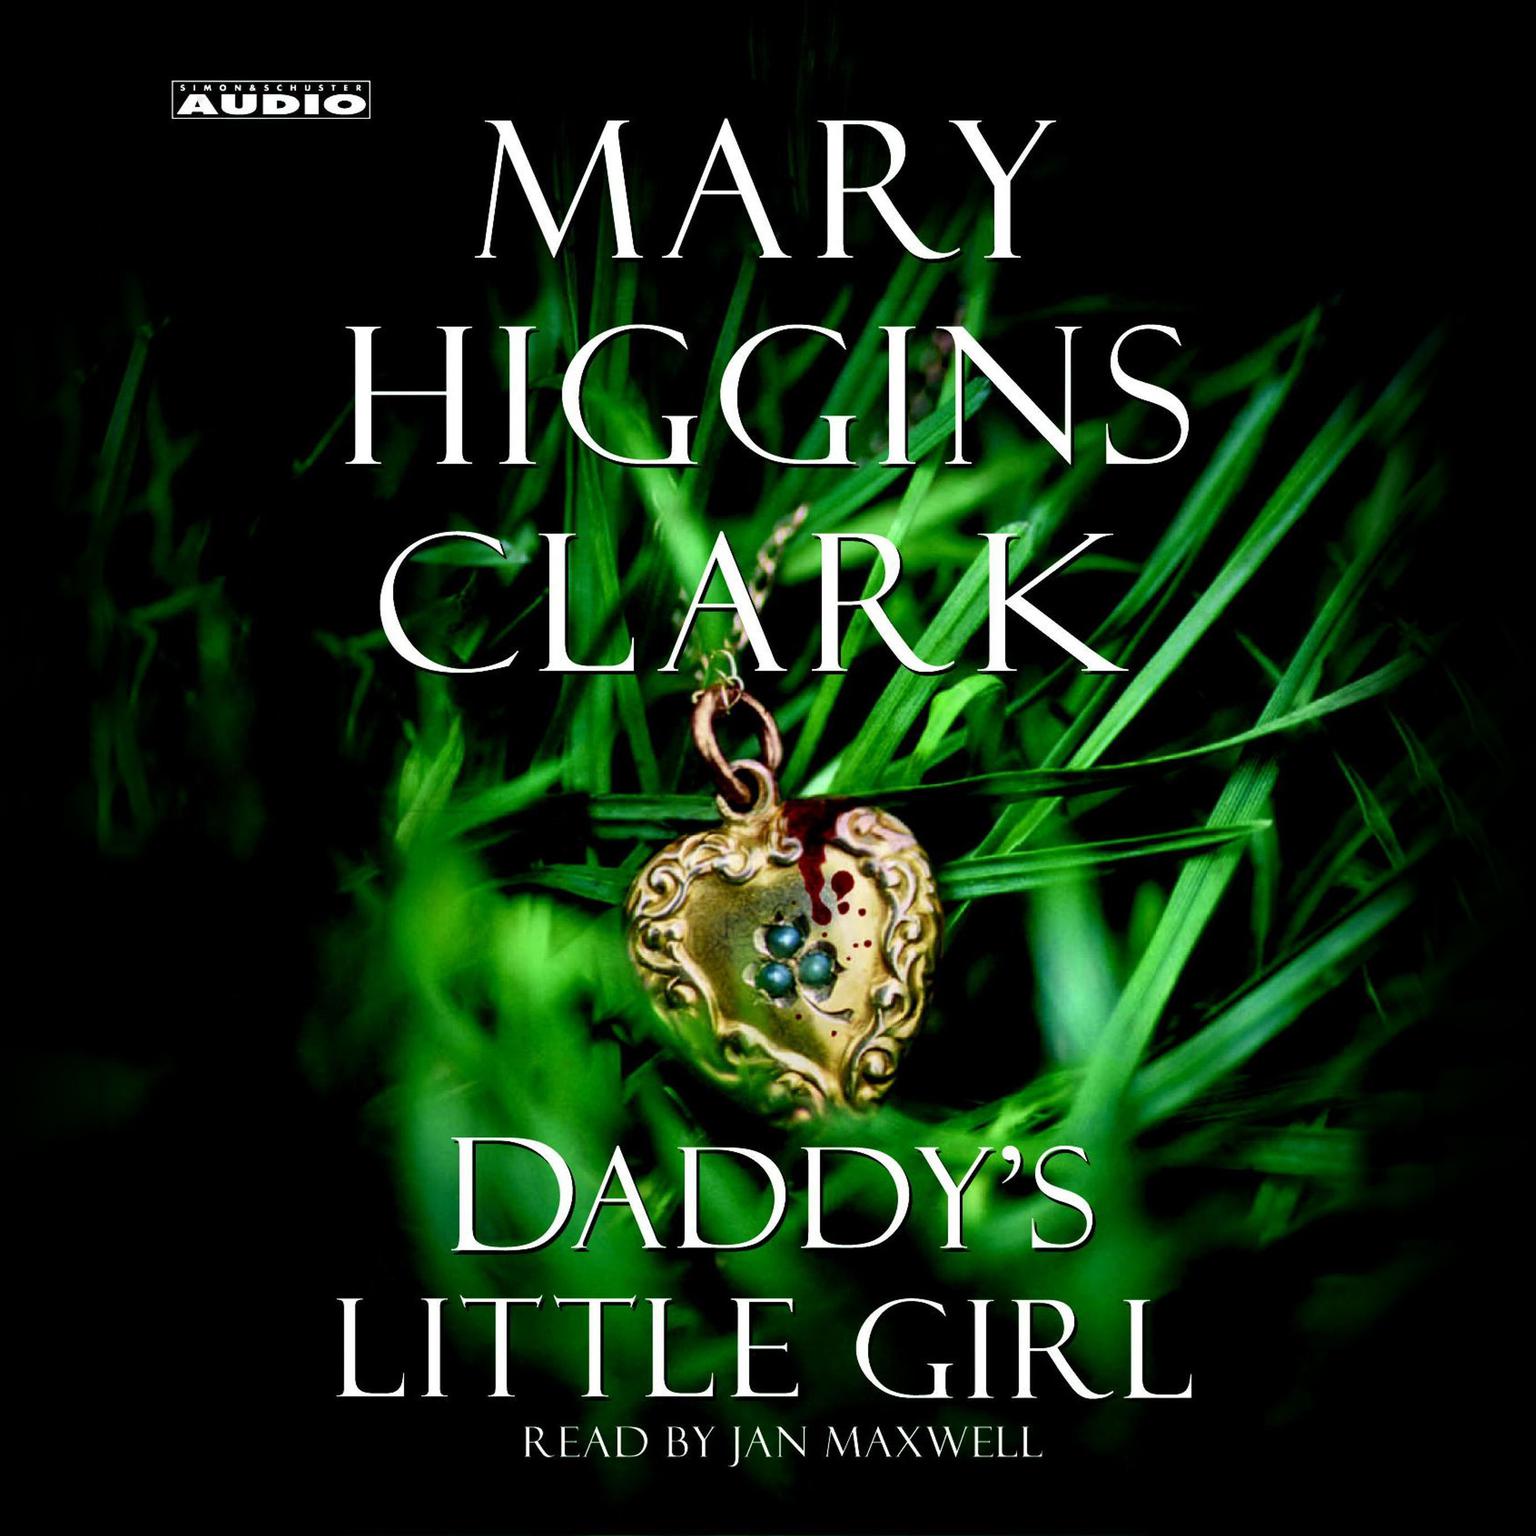 Daddys Little Girl (Abridged) Audiobook, by Mary Higgins Clark